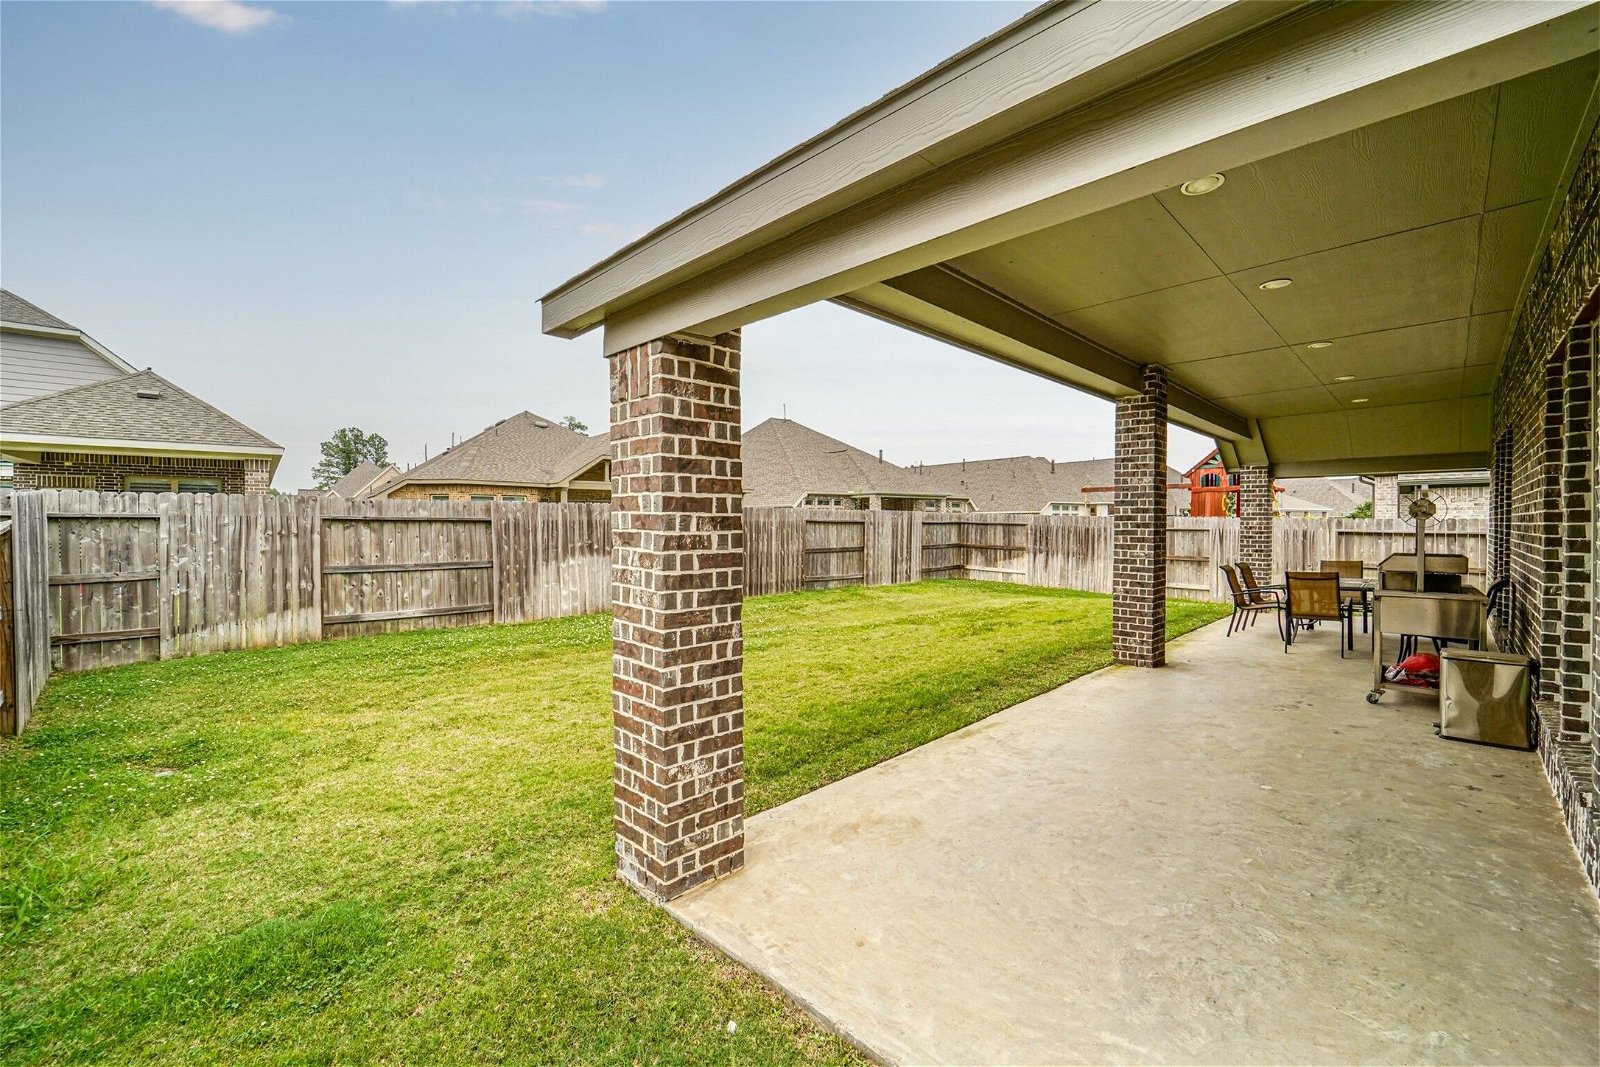 Real estate property located at 9422 Mont Ellie, Harris, Tomball, TX, US